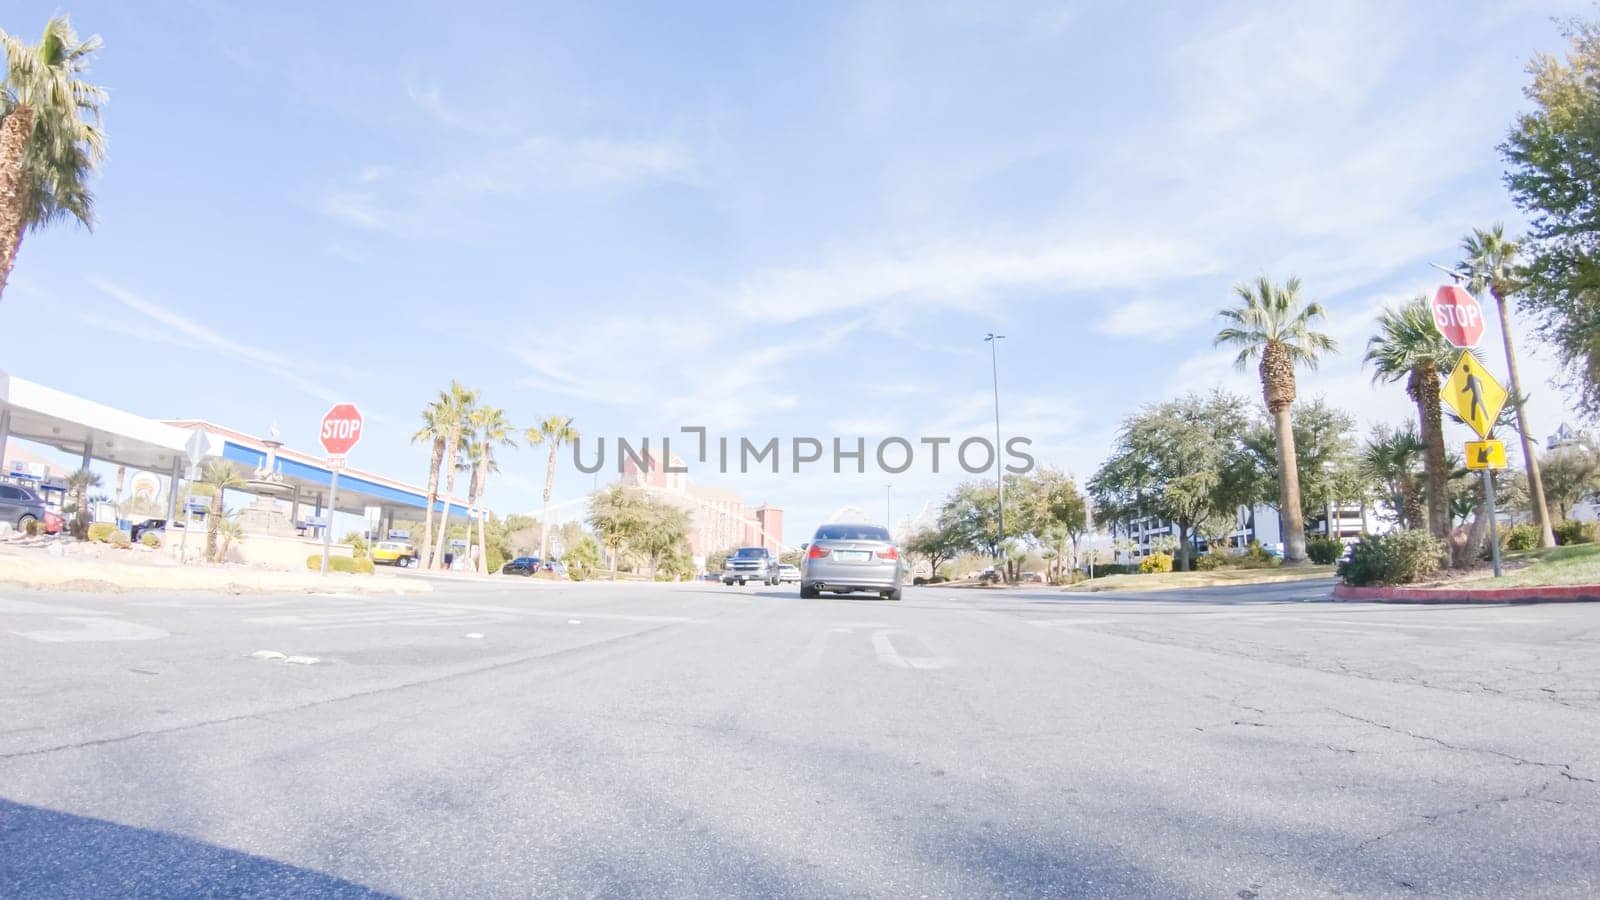 Daytime Drive: Primm Streets near Vibrant Casinos by arinahabich